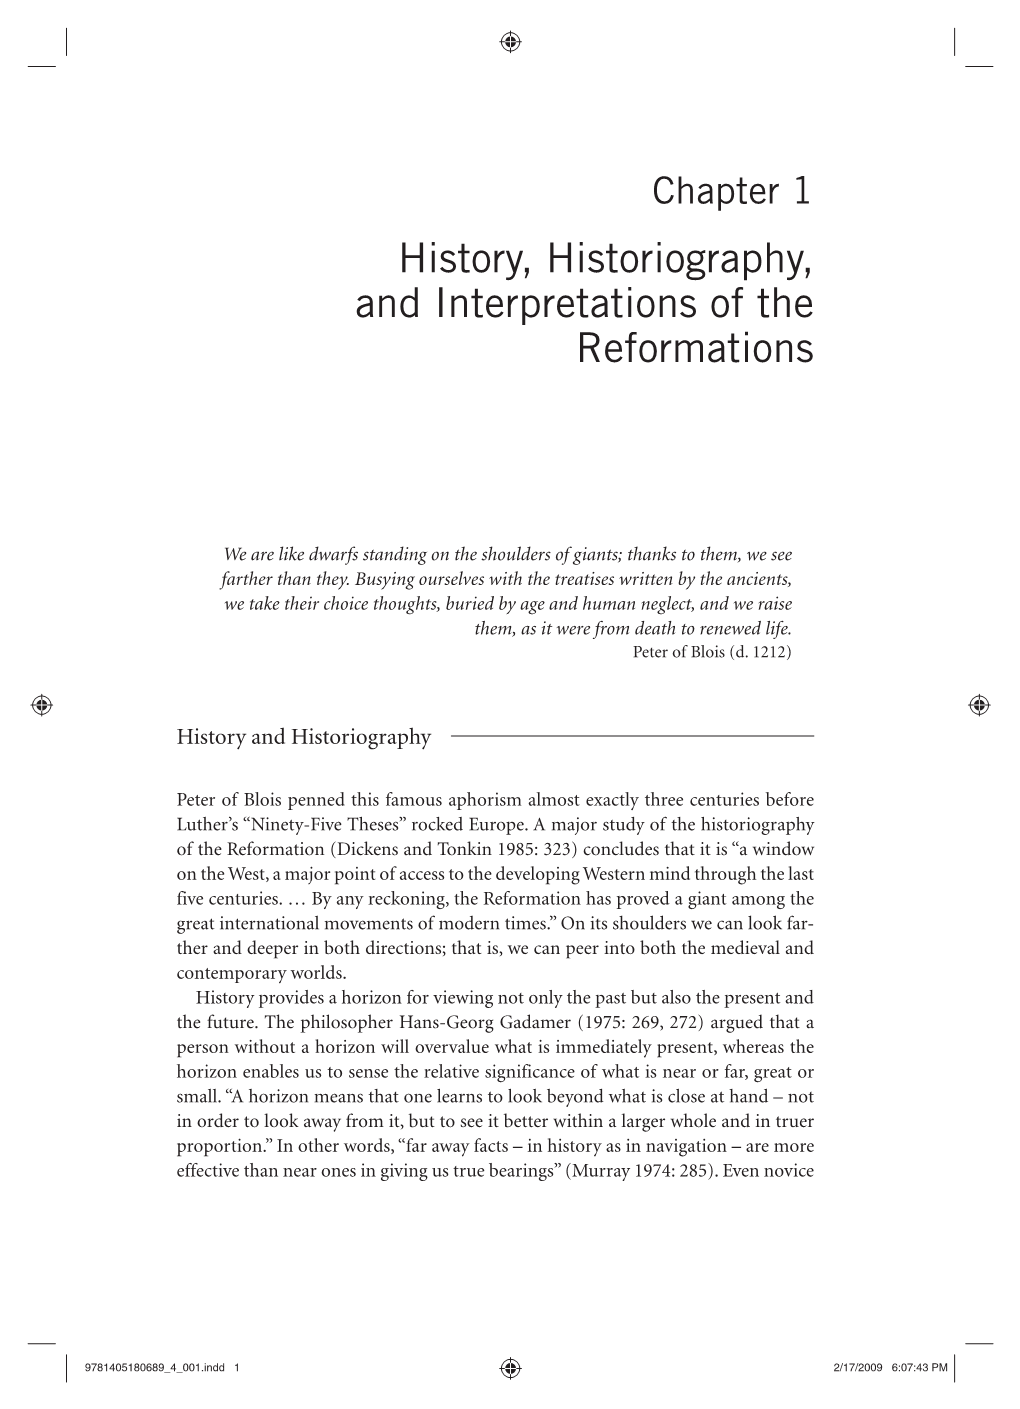 History, Historiography, and Interpretations of the Reformations